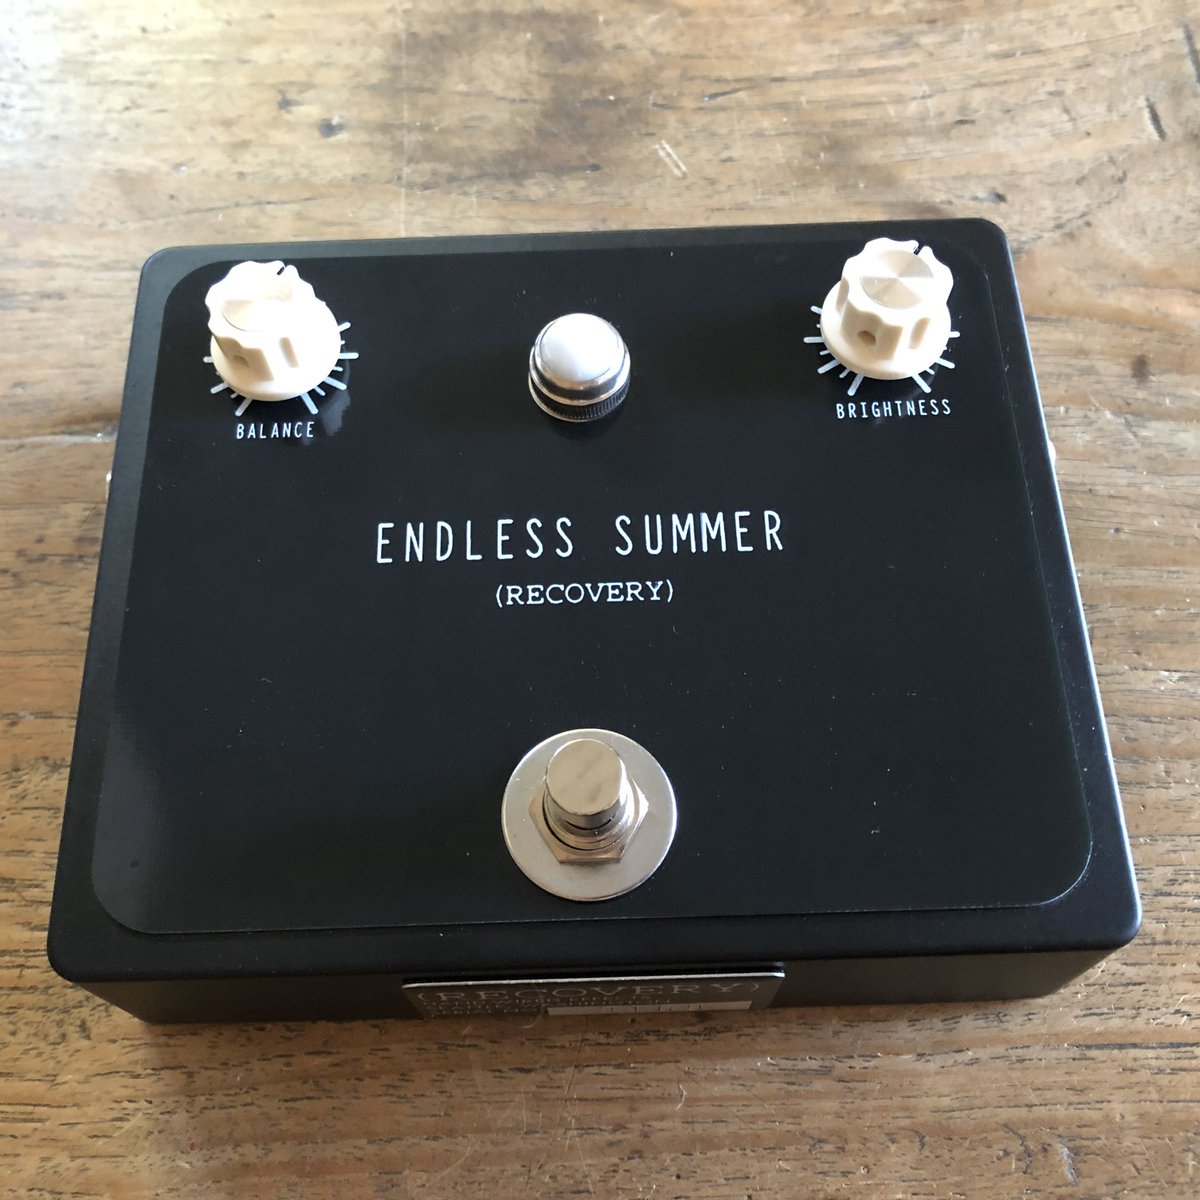 Hit us up if you’ve been holding out for an Endless Summer in a black enclosure. We’ve got ONE left!
———————————————
recoveryeffects.com
———————————————
#recoveryeffects #endlesssummer #springreverb #reverbpedal #reverb #realspringreverb #guitarreverb